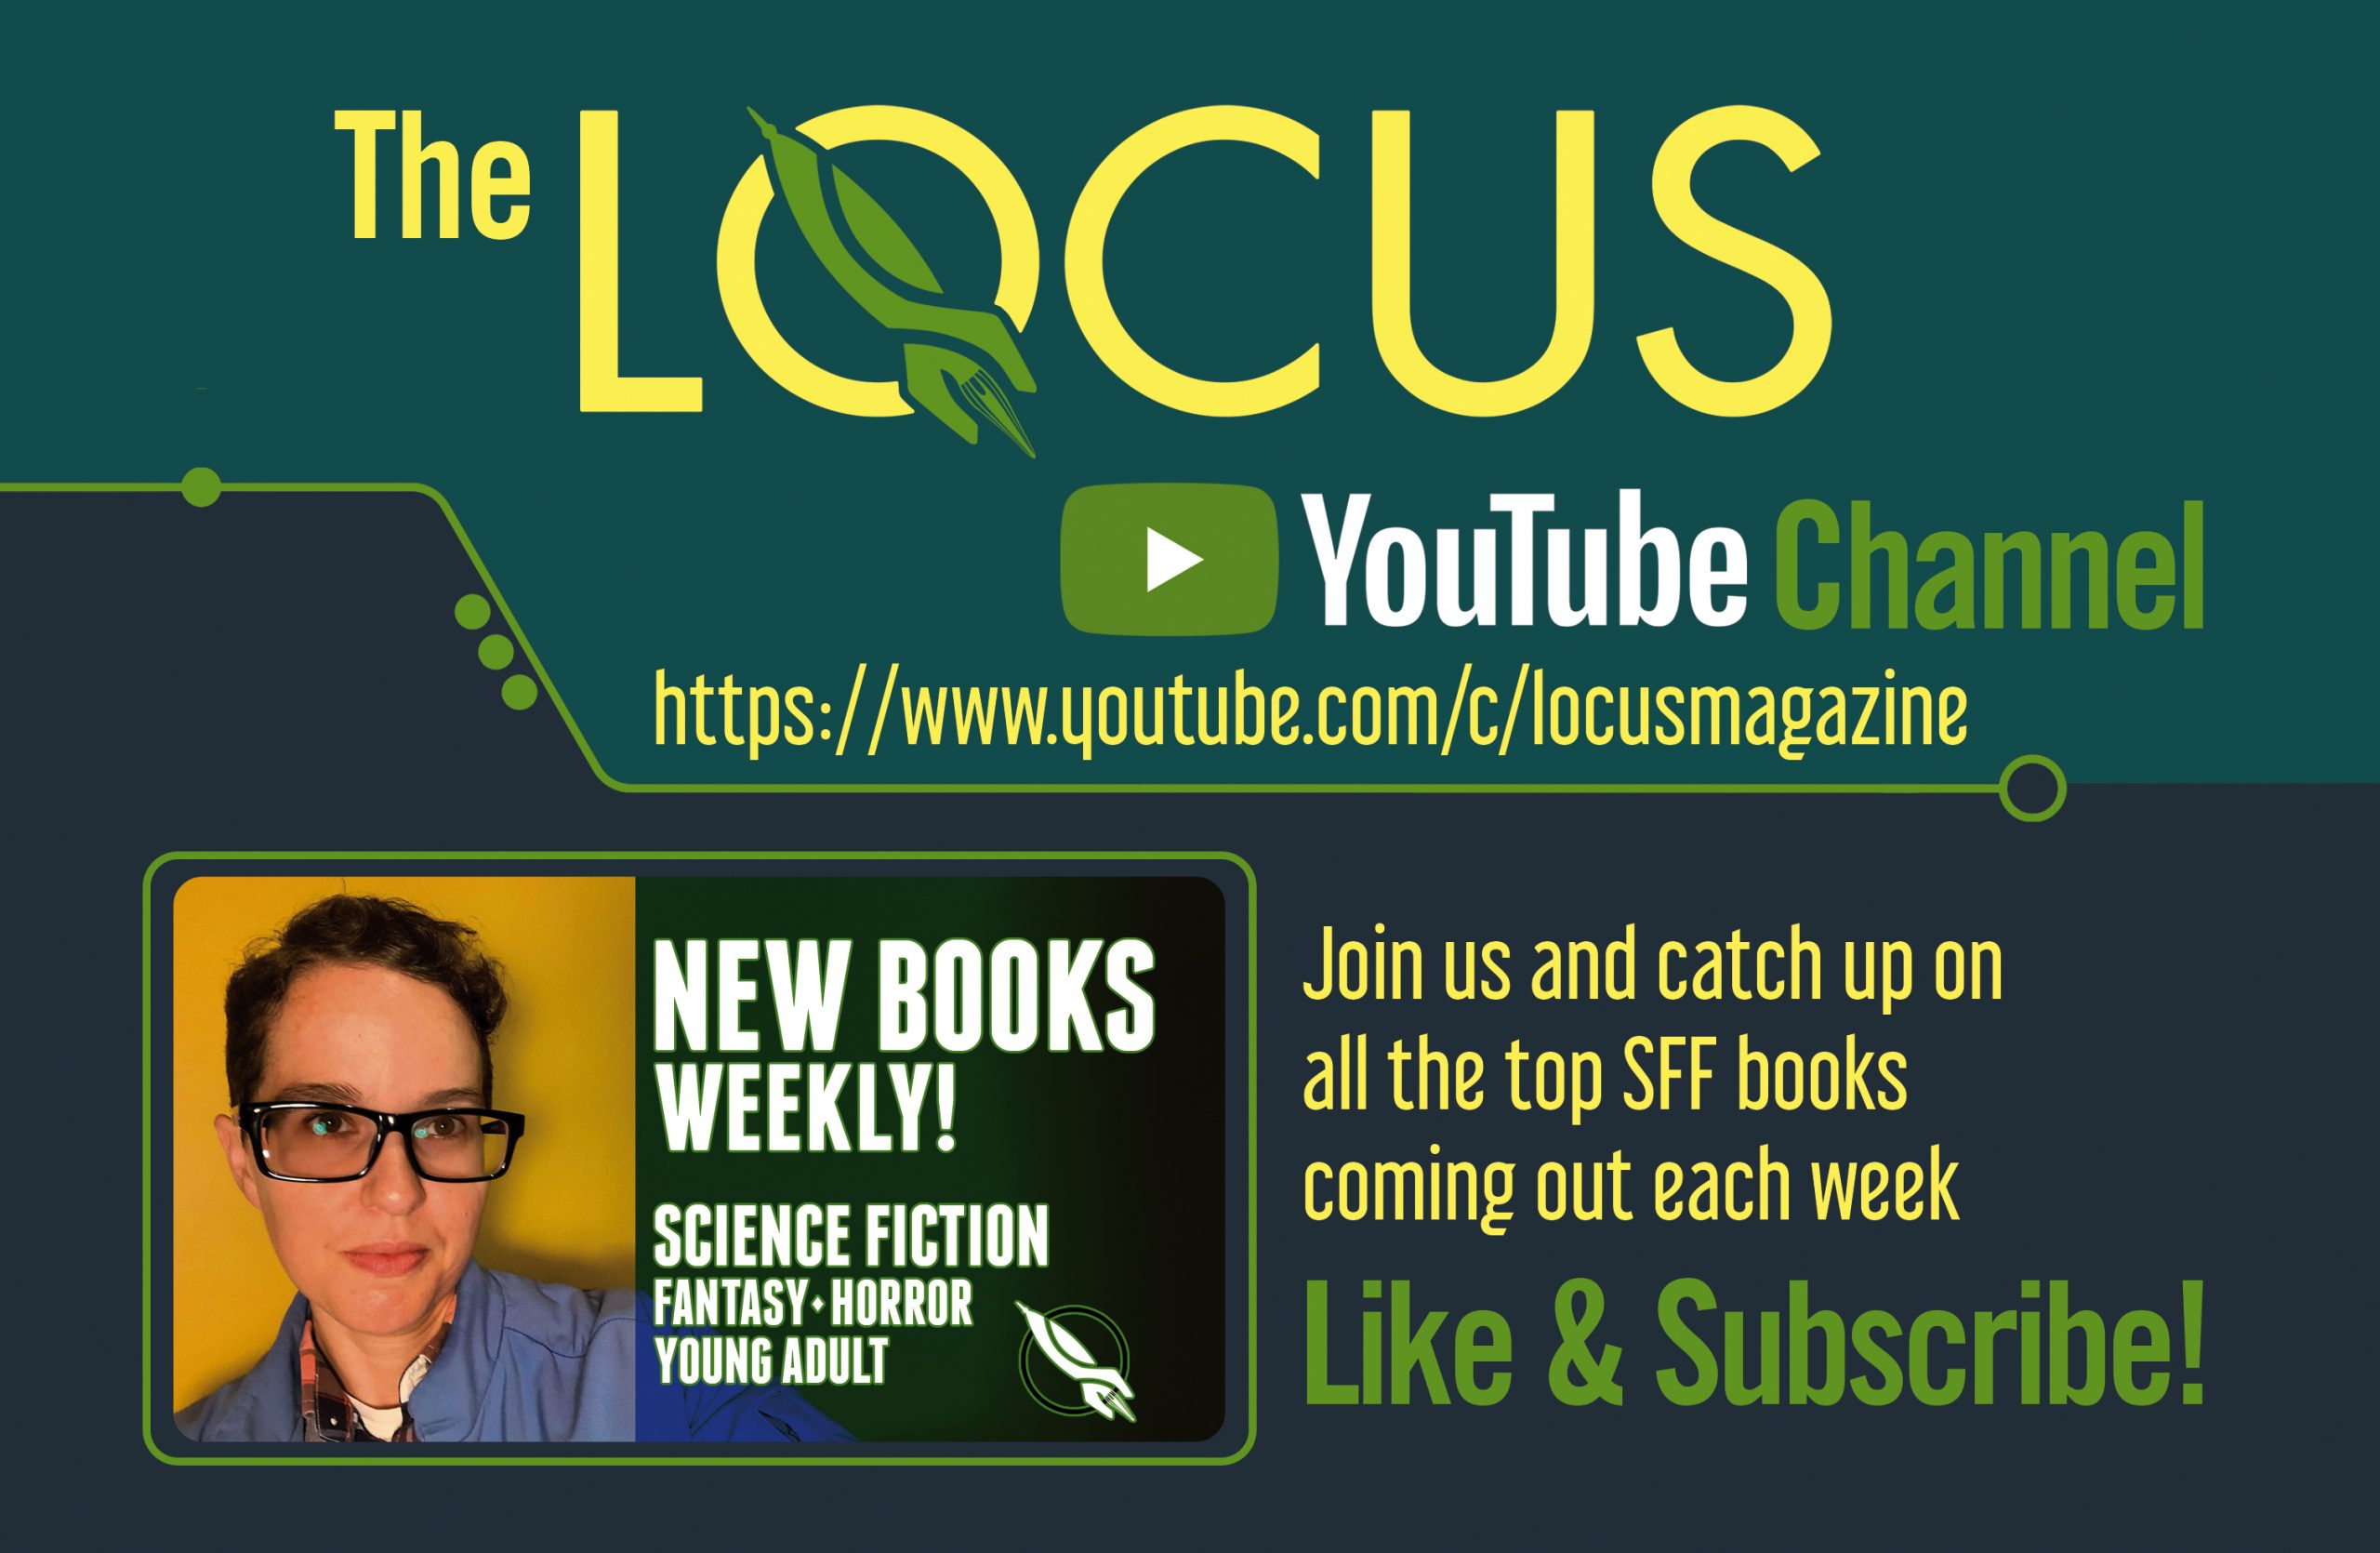 Locus YouTube Channel Ad